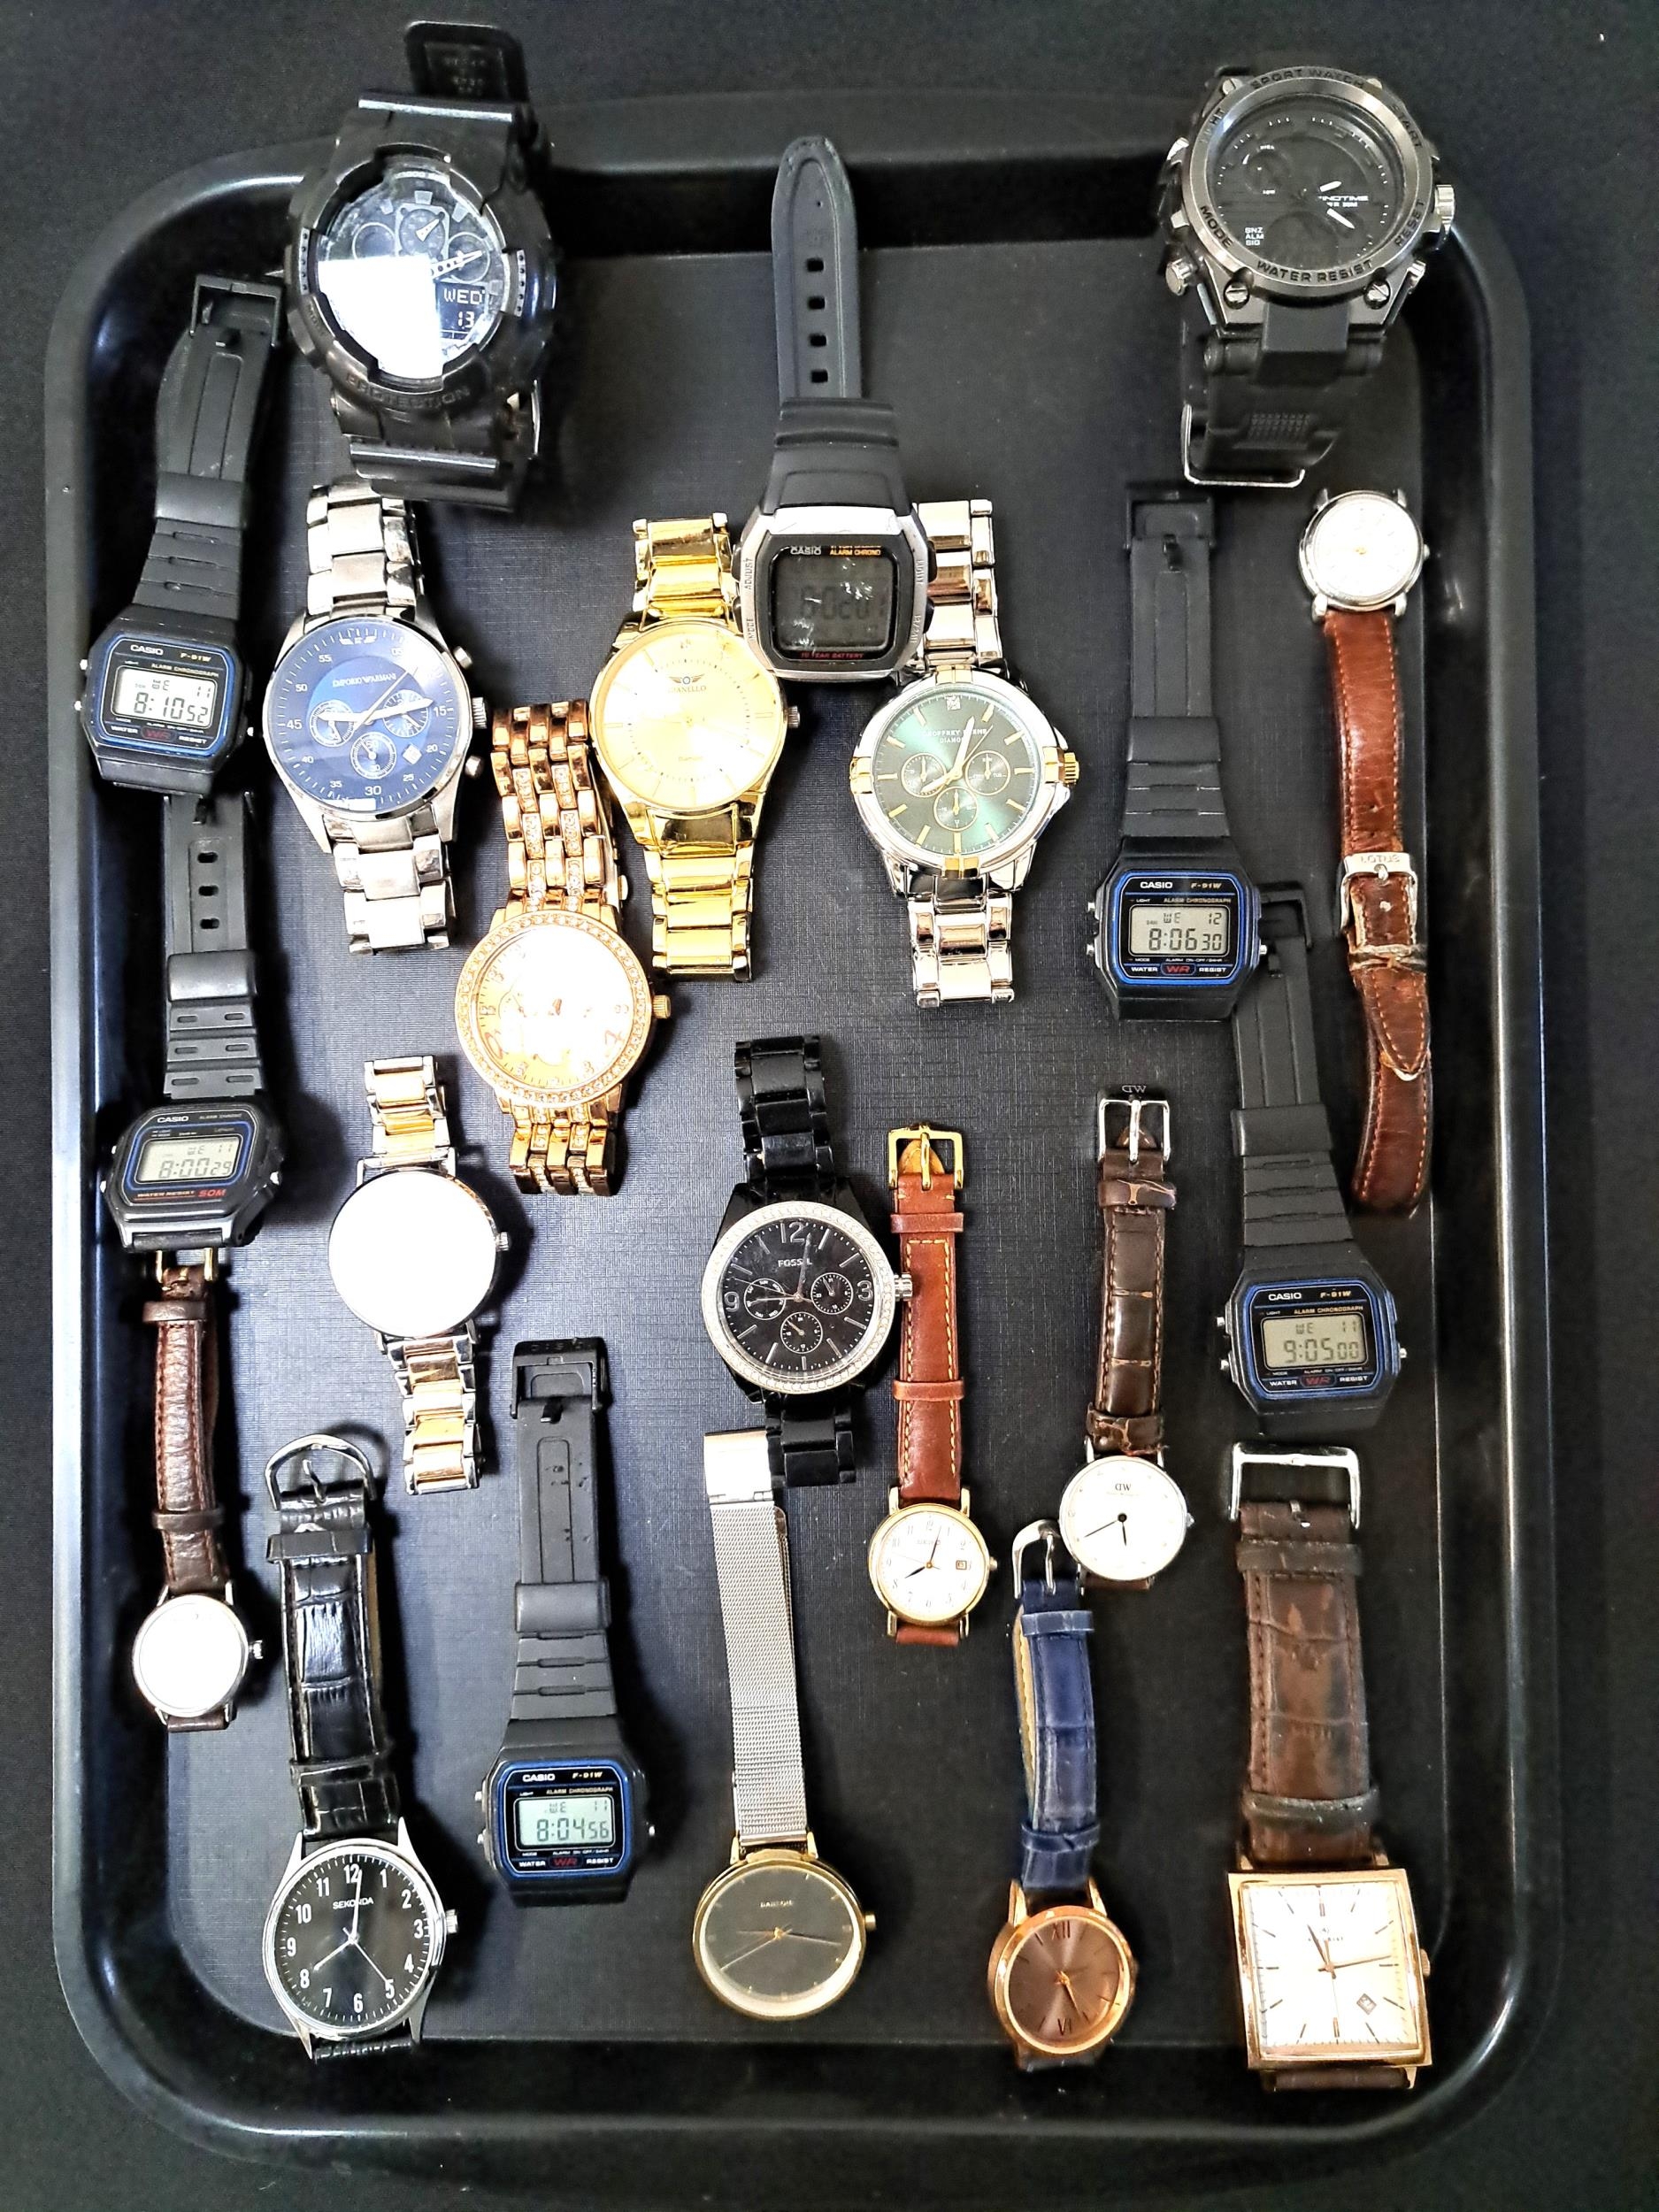 SELECTION OF LADIES AND GENTLEMEN'S WRISTWATCHES including Fossil, Casio, G-Shock, Emporio Armani,